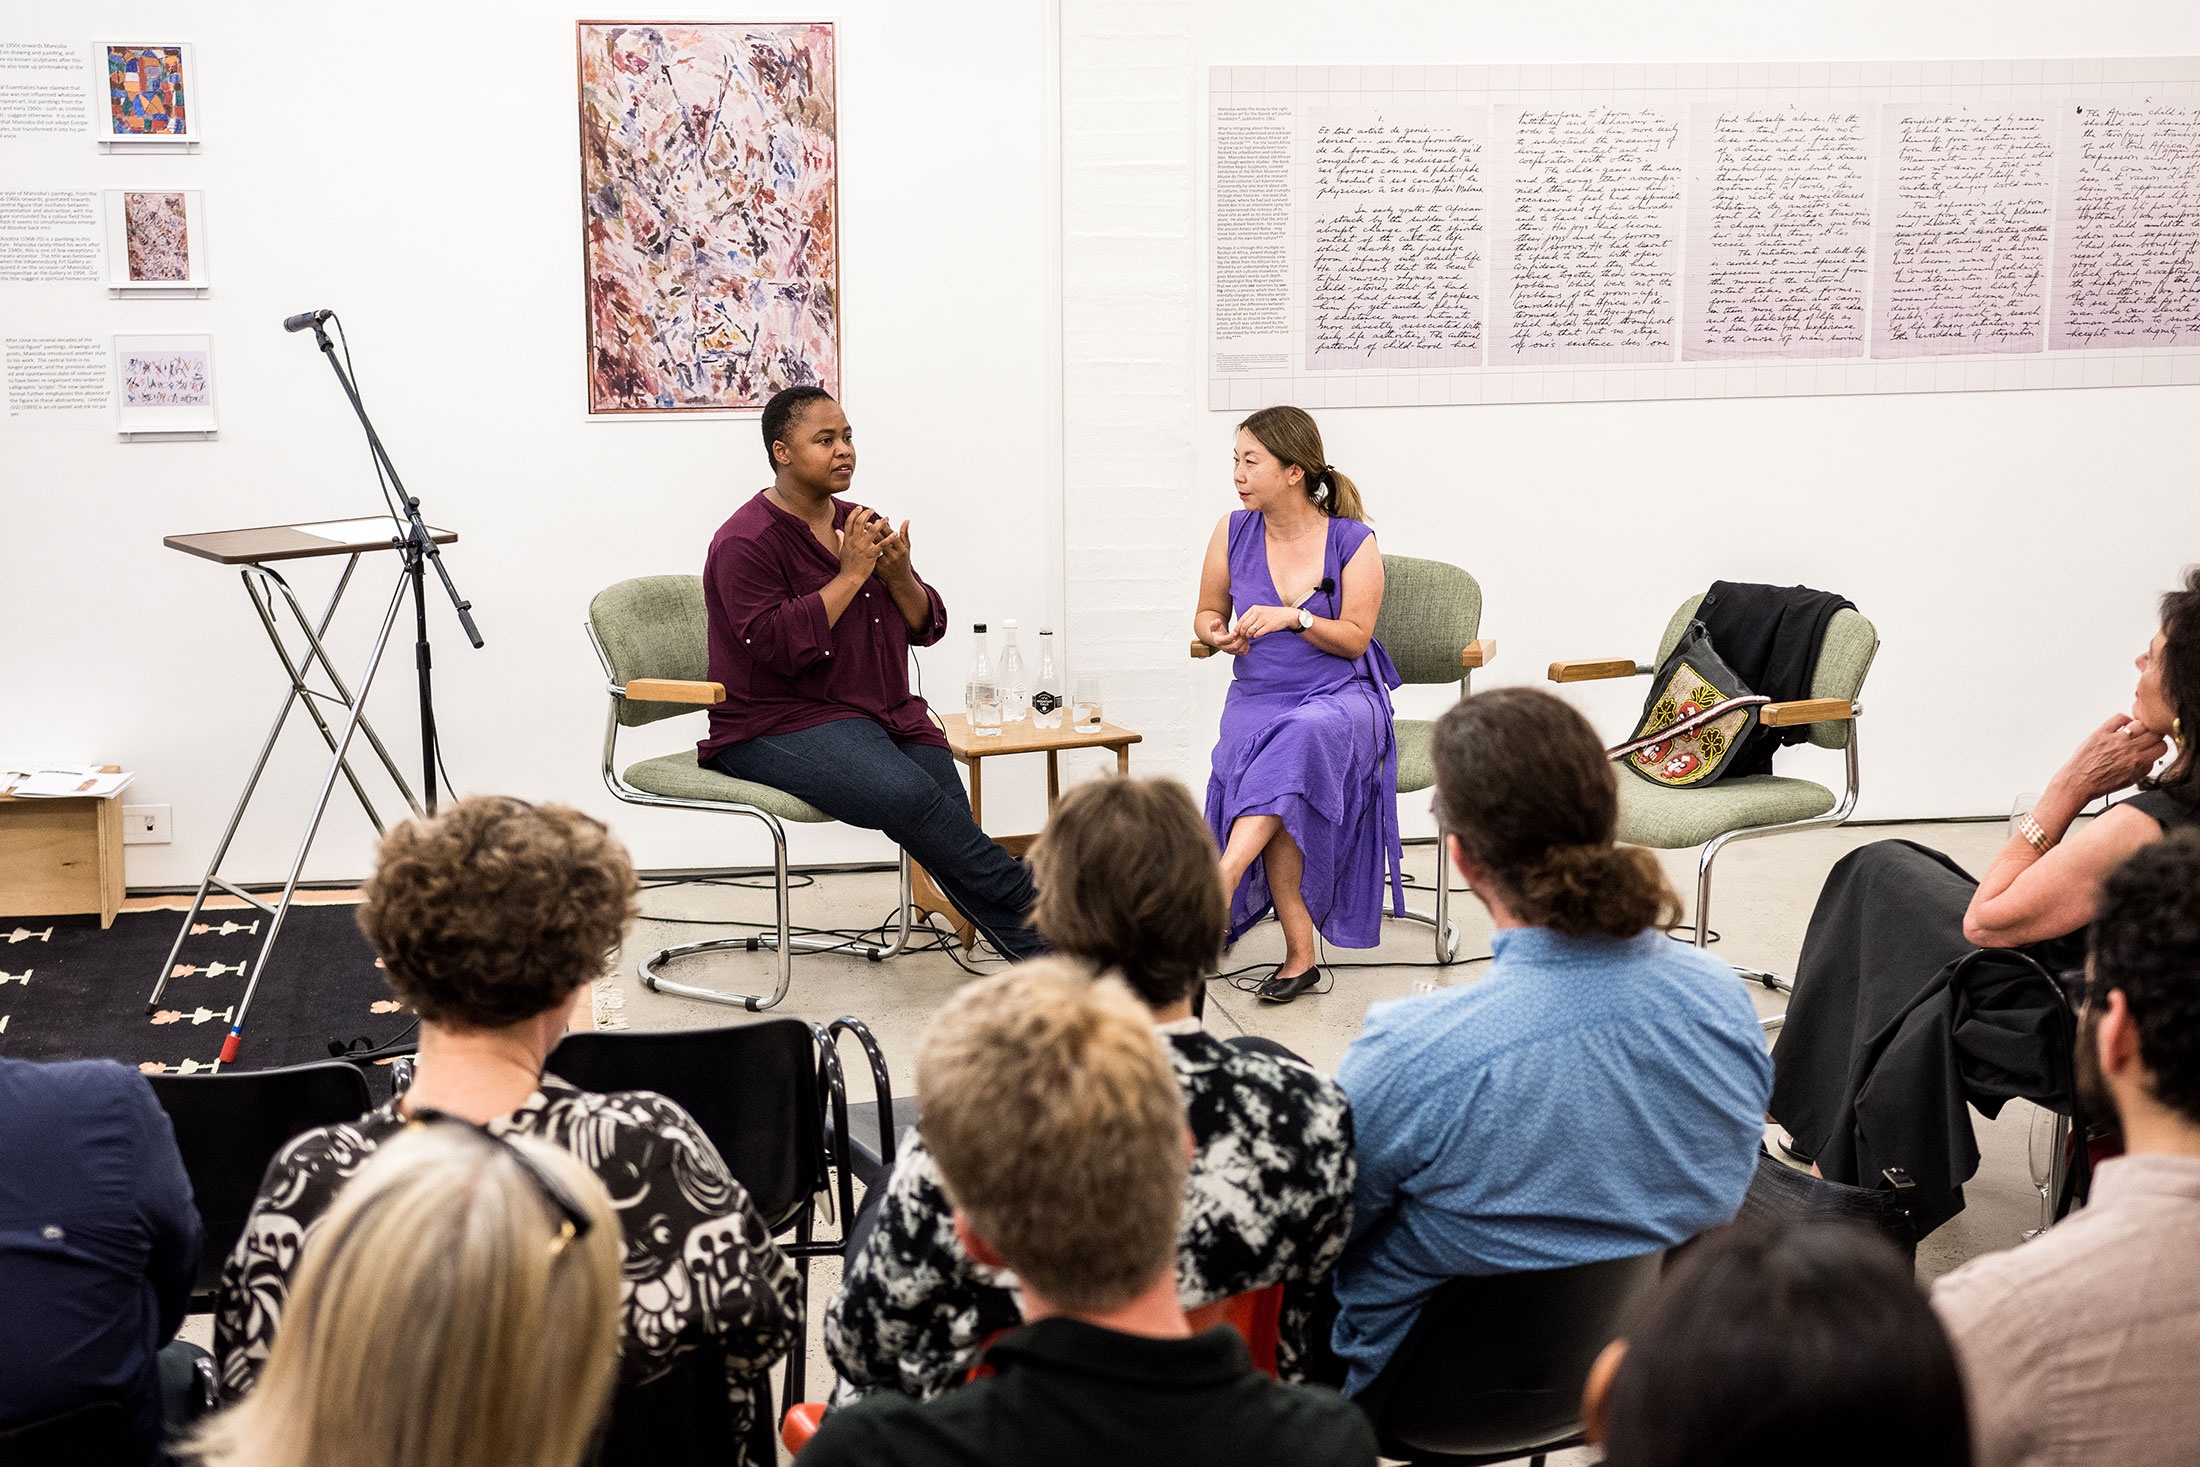 Event photograph from the Ernest Mancoba Symposium at A4 Arts Foundation. At the front, audience members are seated in rows. In the middle, two speakers are seated facing the audience. At the back, posters of artworks and text line a white wall.
